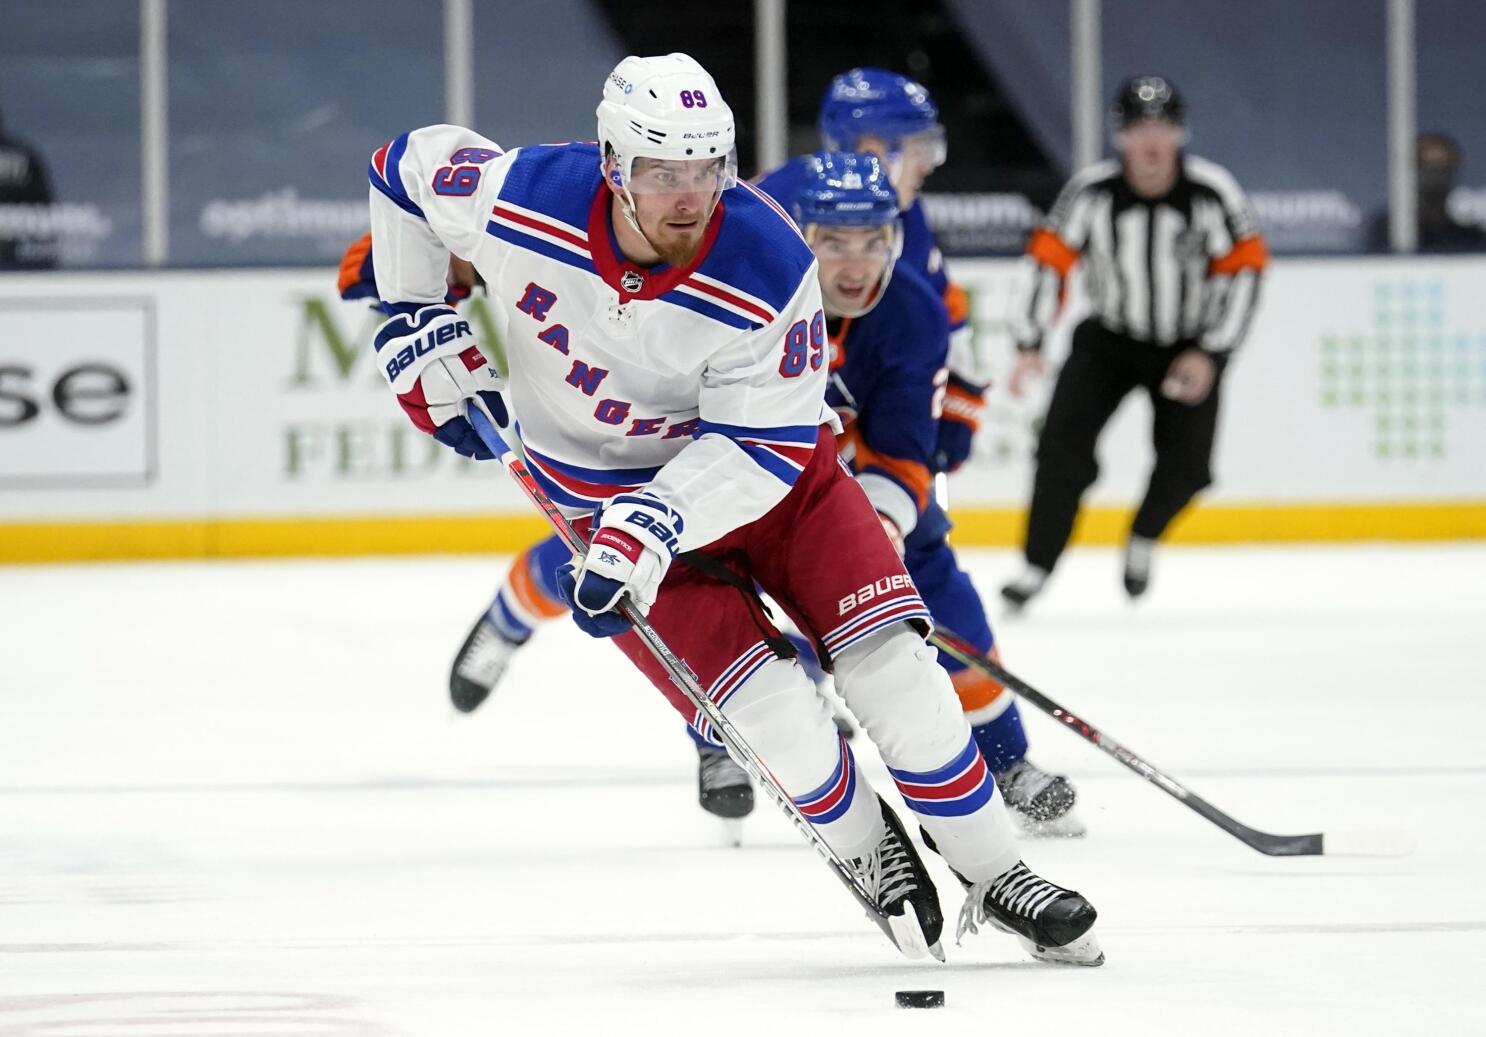 New York Rangers: The story behind Anthony DeAngelo - Page 2